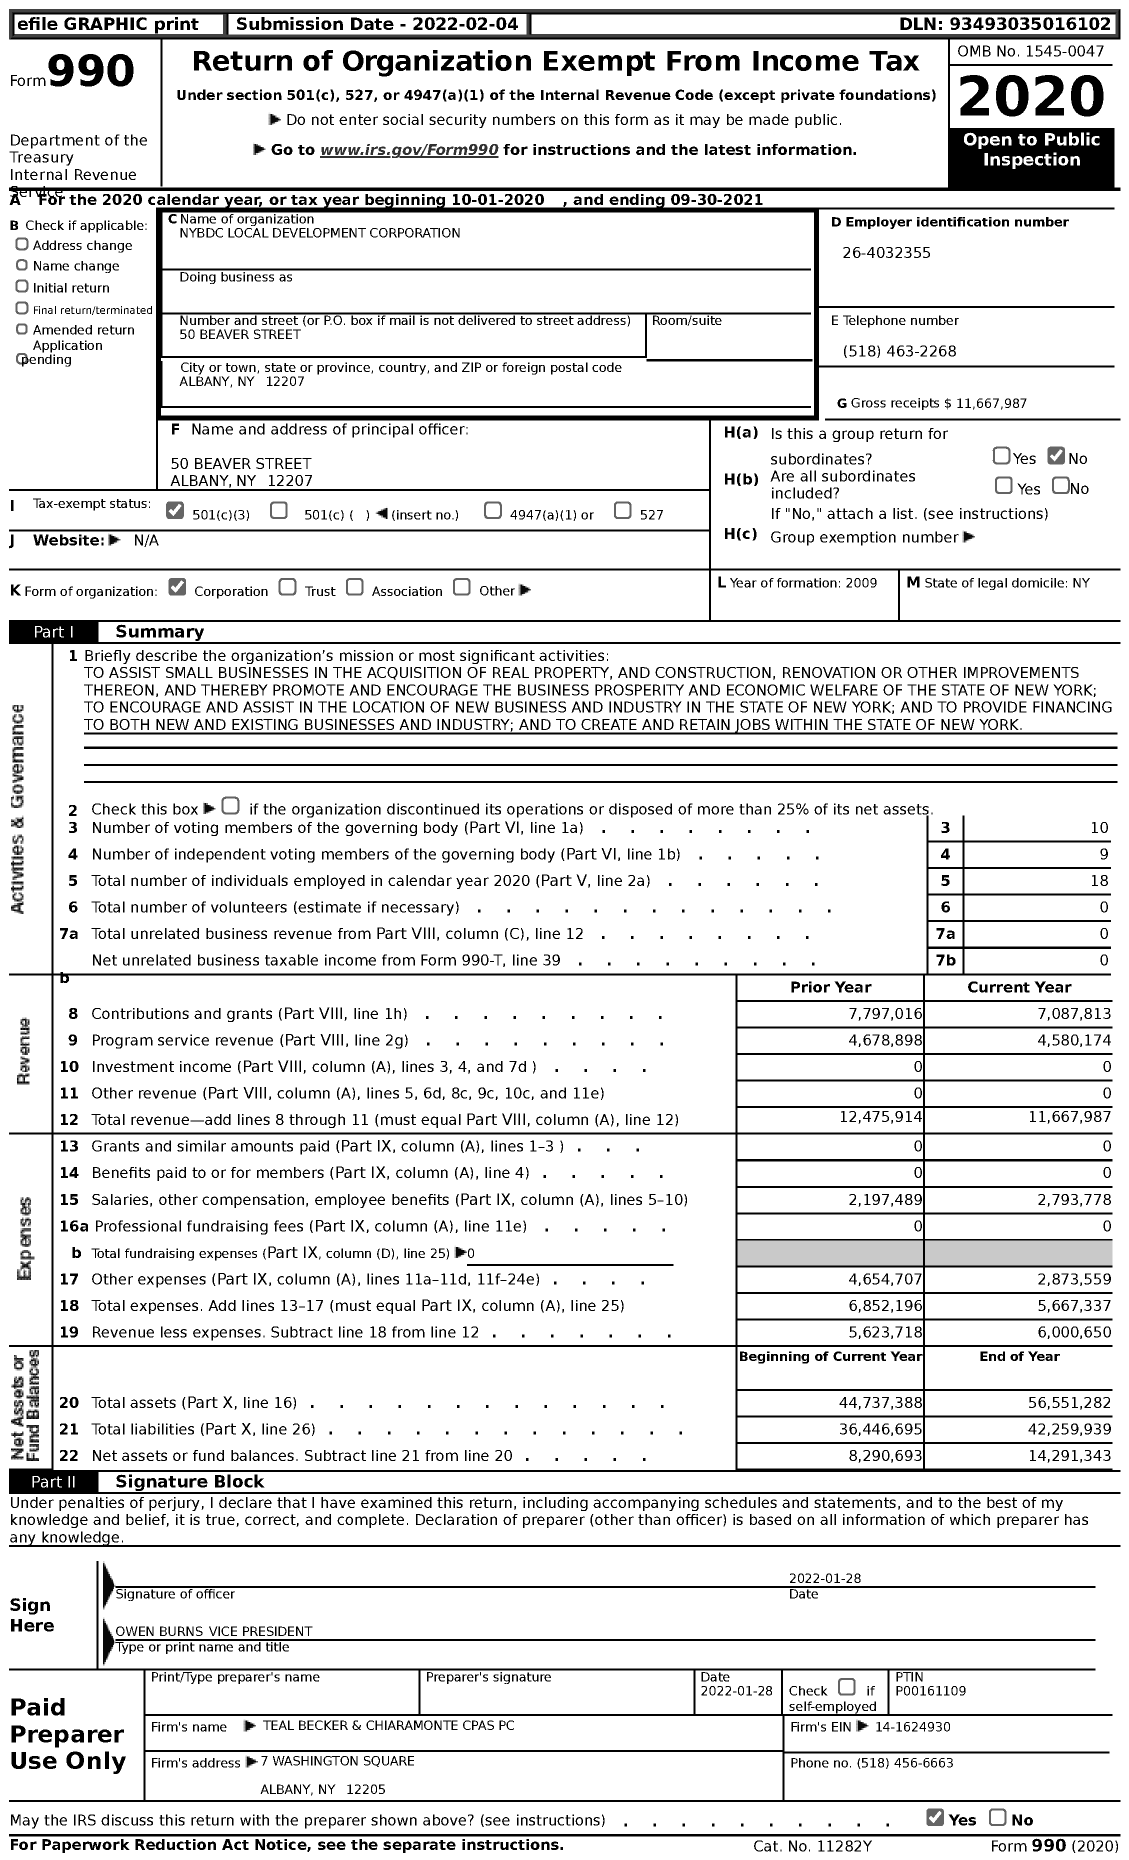 Image of first page of 2020 Form 990 for Nybdc Local Development Corporation